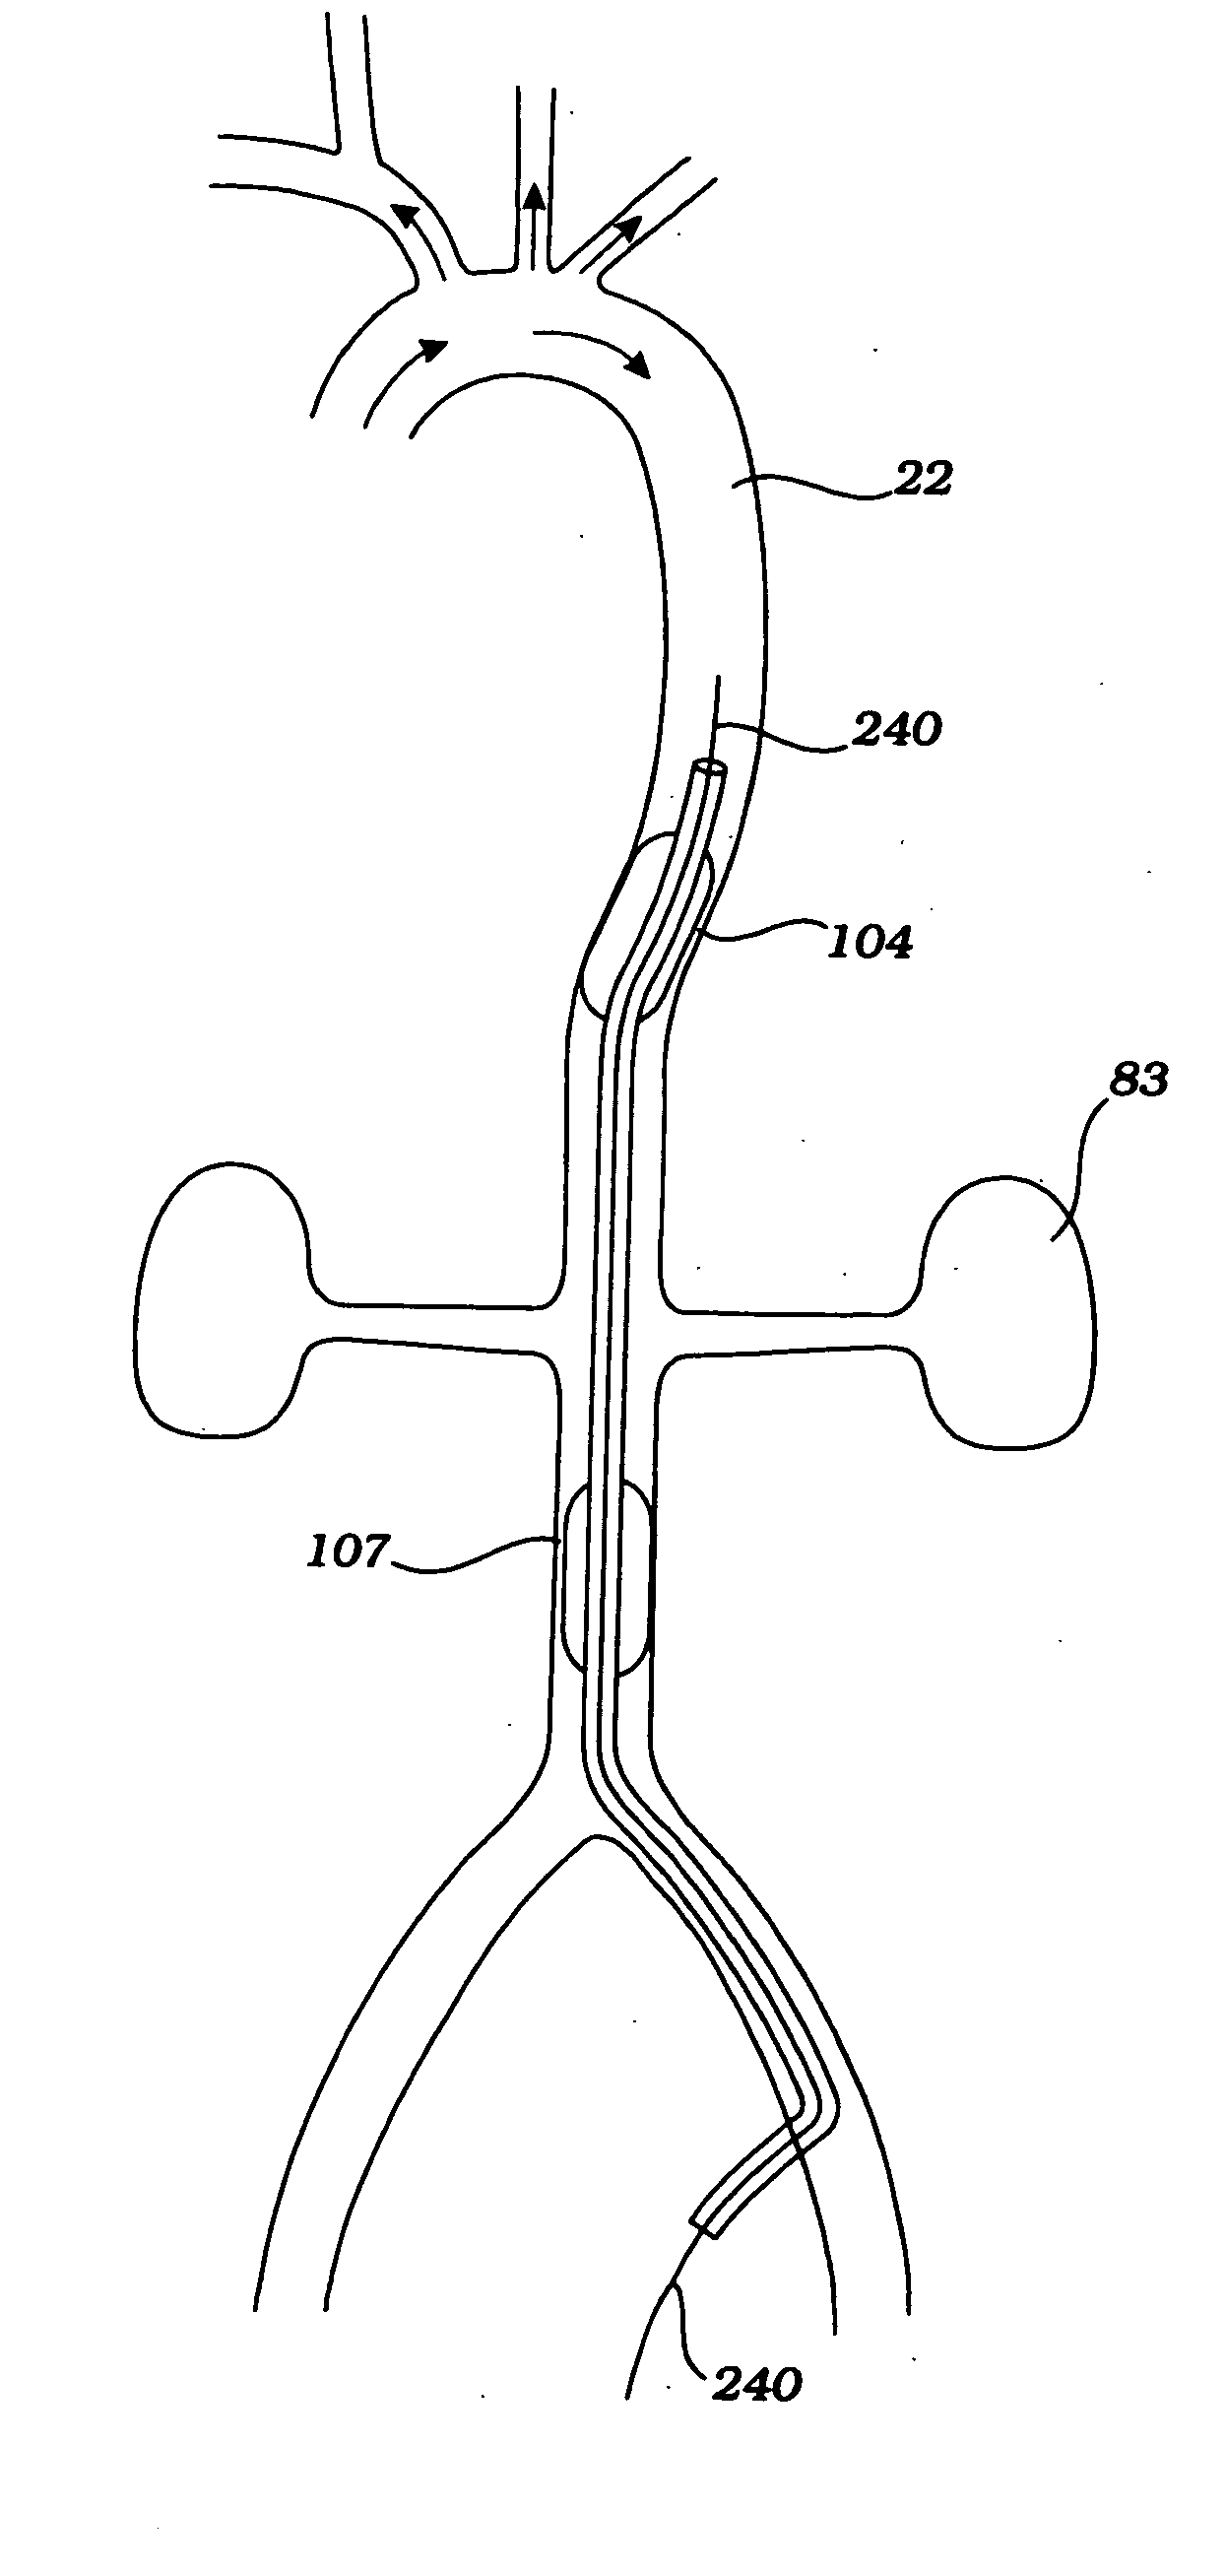 Partial aortic occlusion devices and methods for cerebral perfusion augmentation